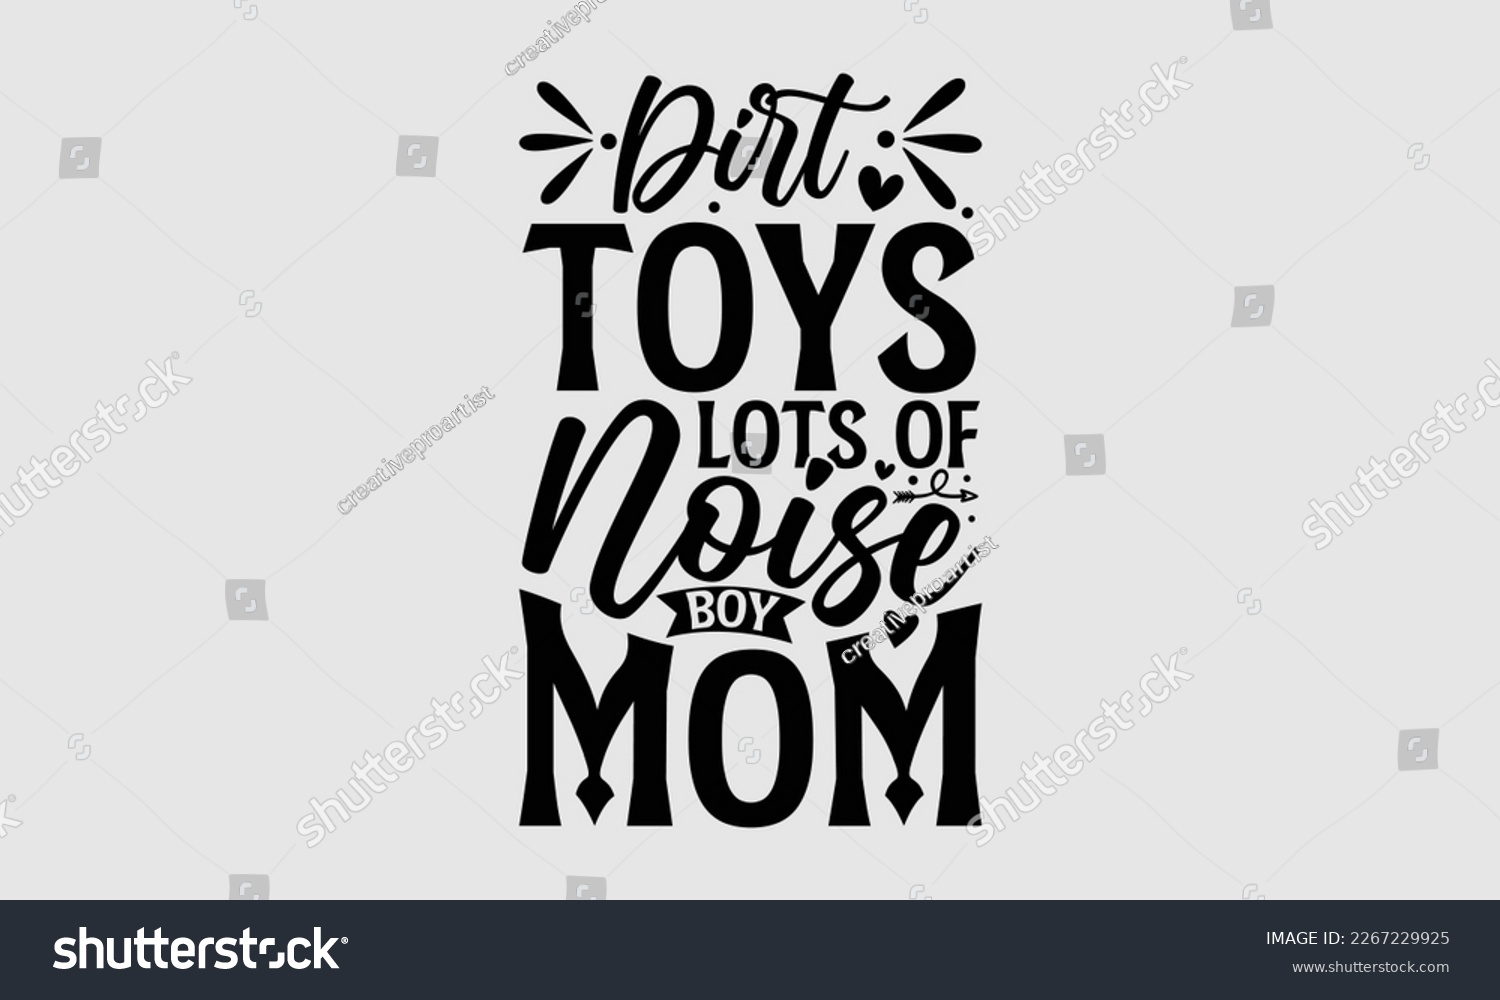 SVG of Dirt toys lots of noise boy mom- Mother's day t-shirt and svg design, Hand Drawn calligraphy Phrases, greeting cards, mugs, templates, posters, Handwritten Vector, EPS 10. svg